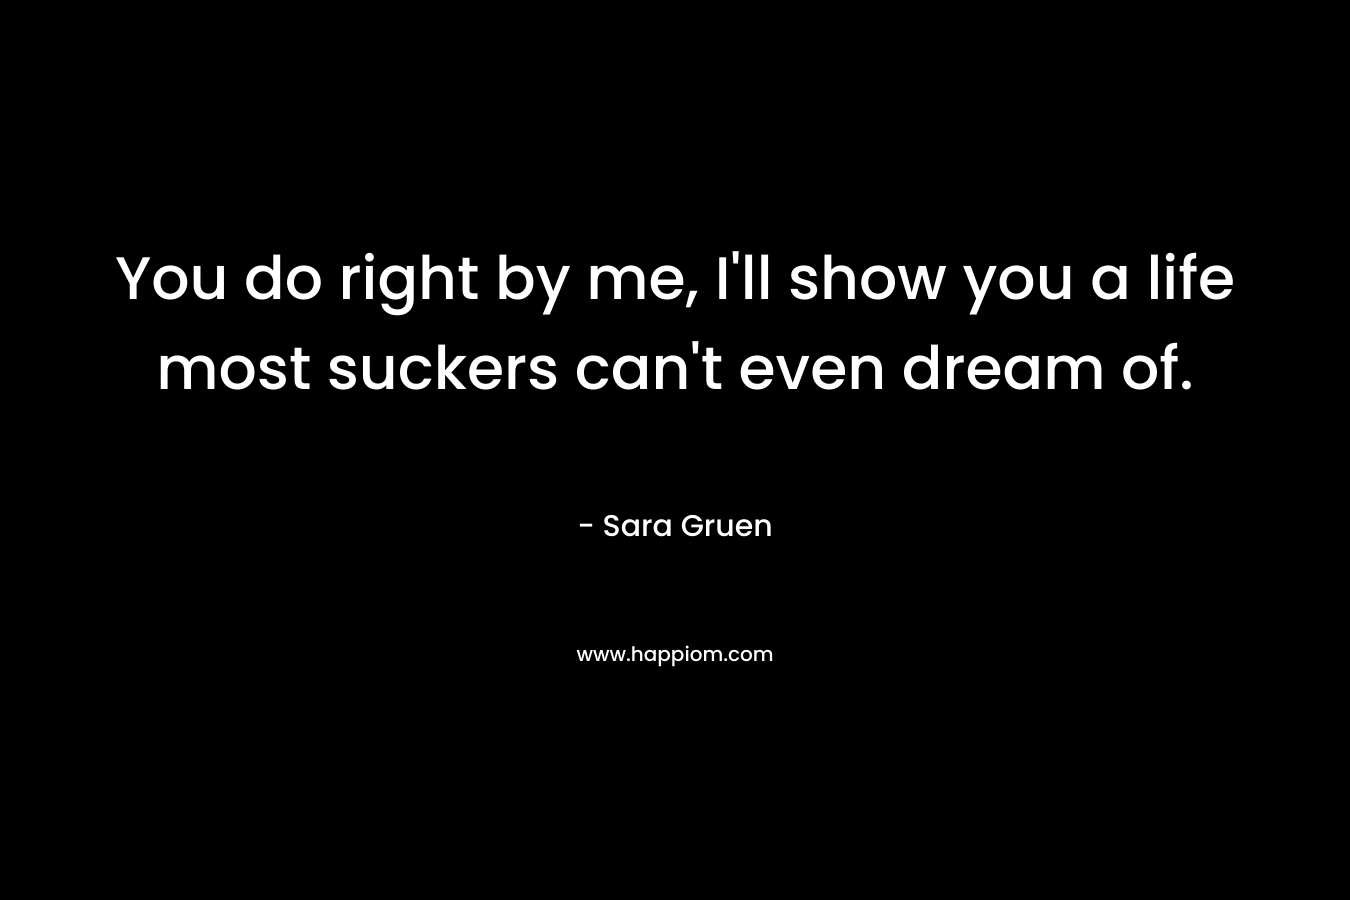 You do right by me, I’ll show you a life most suckers can’t even dream of. – Sara Gruen